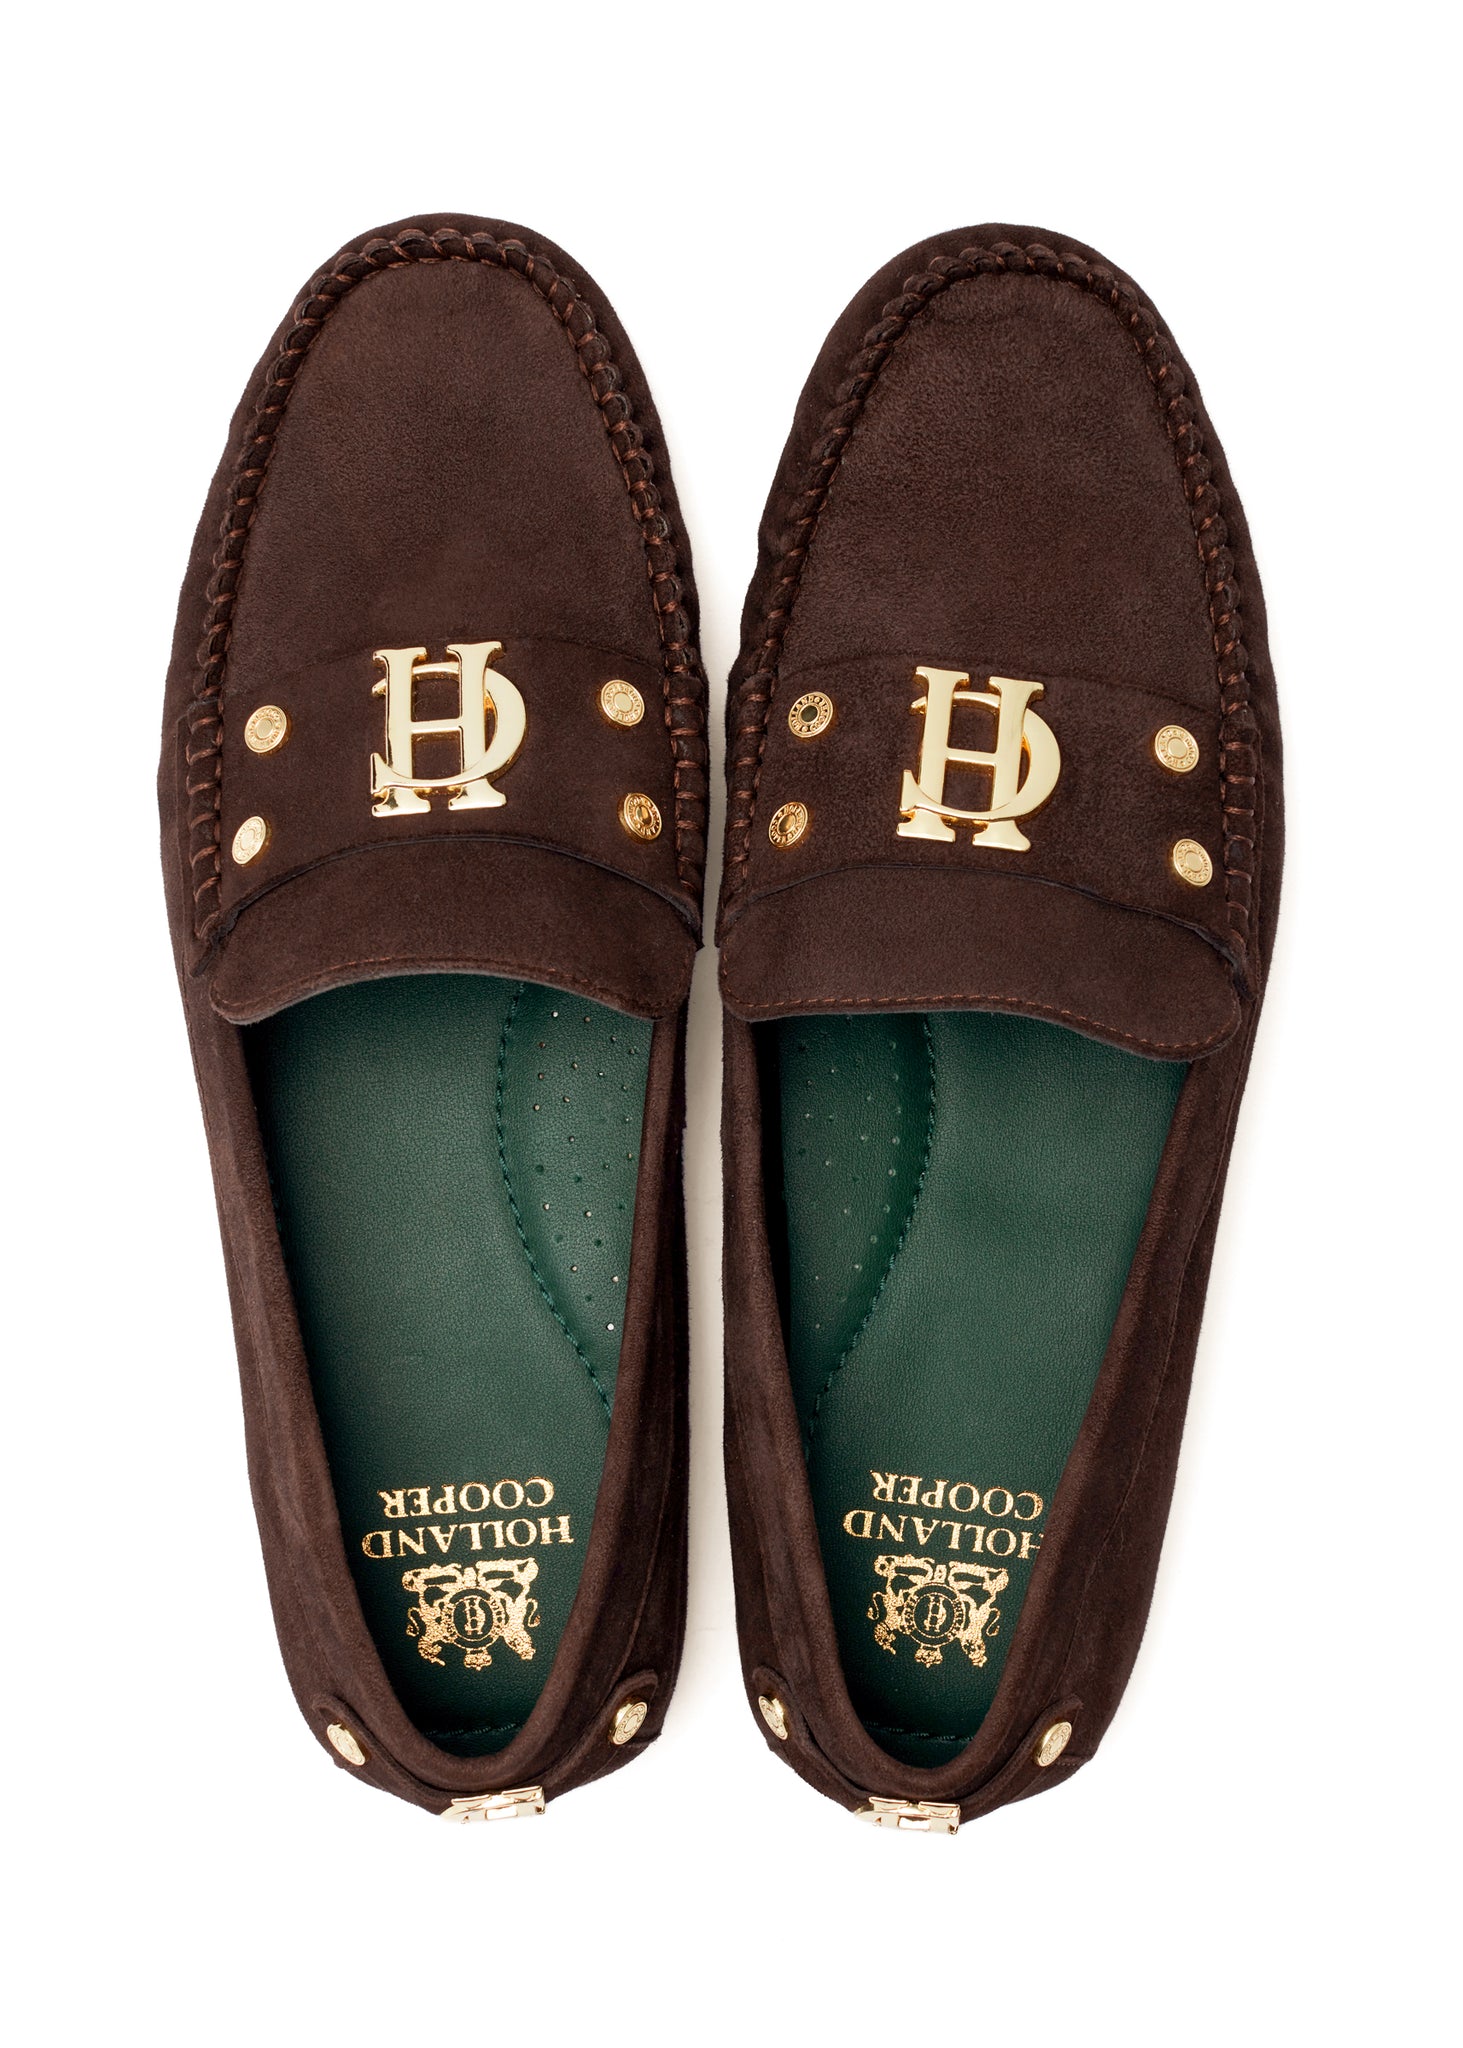    Classic brown suede loafers with a leather sole and top stitching details and gold hardware with a dark green inner sole and gold foil branding 